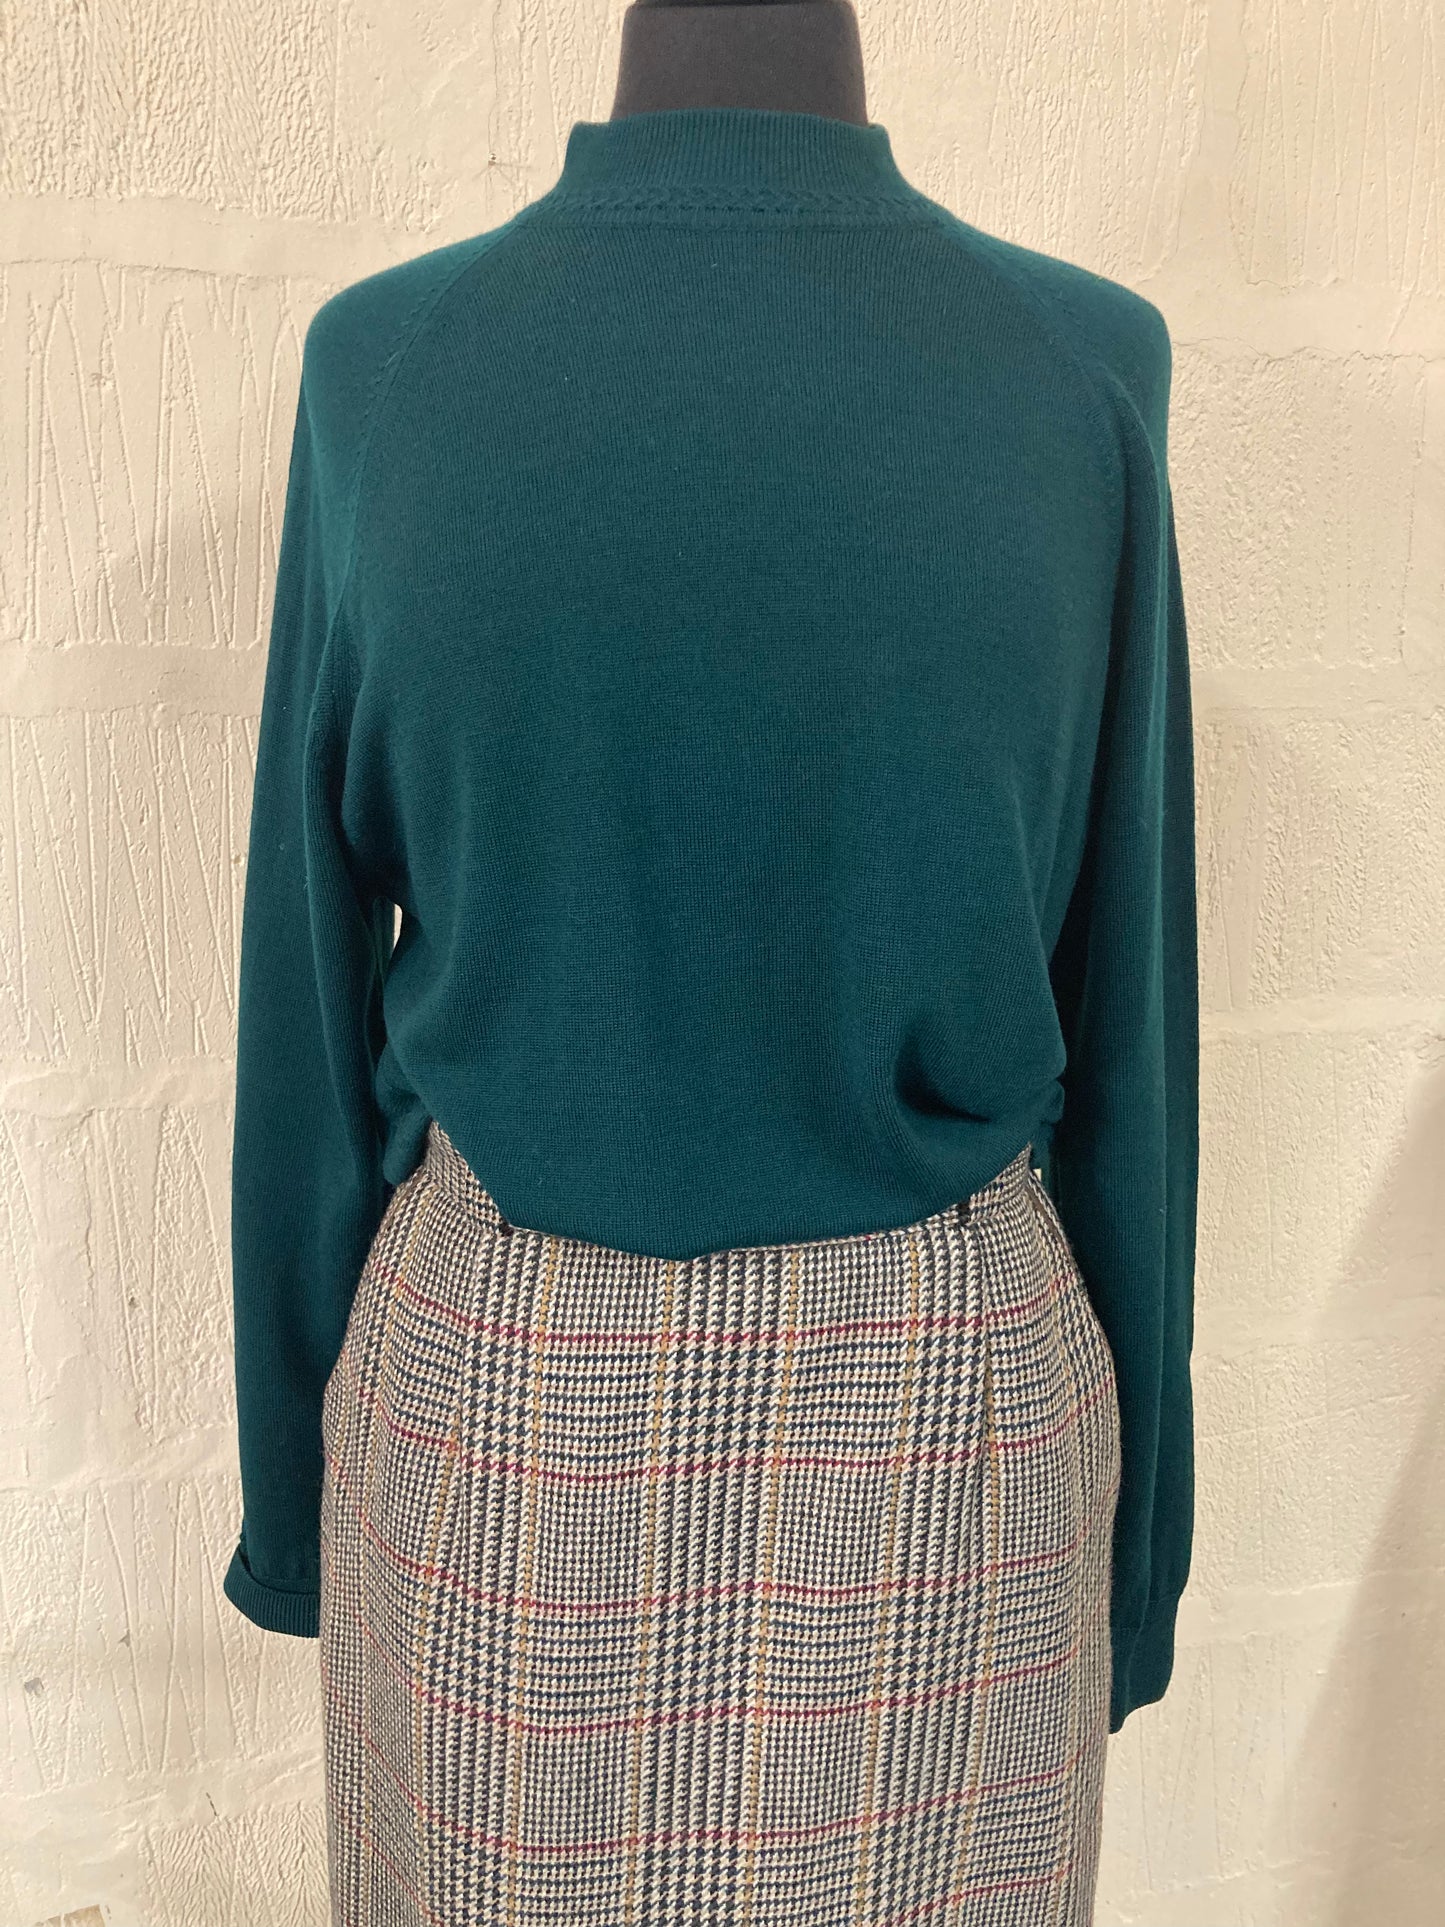 Vintage St Michael Green, Red and Mustard Tweed Skirt Size 10/12